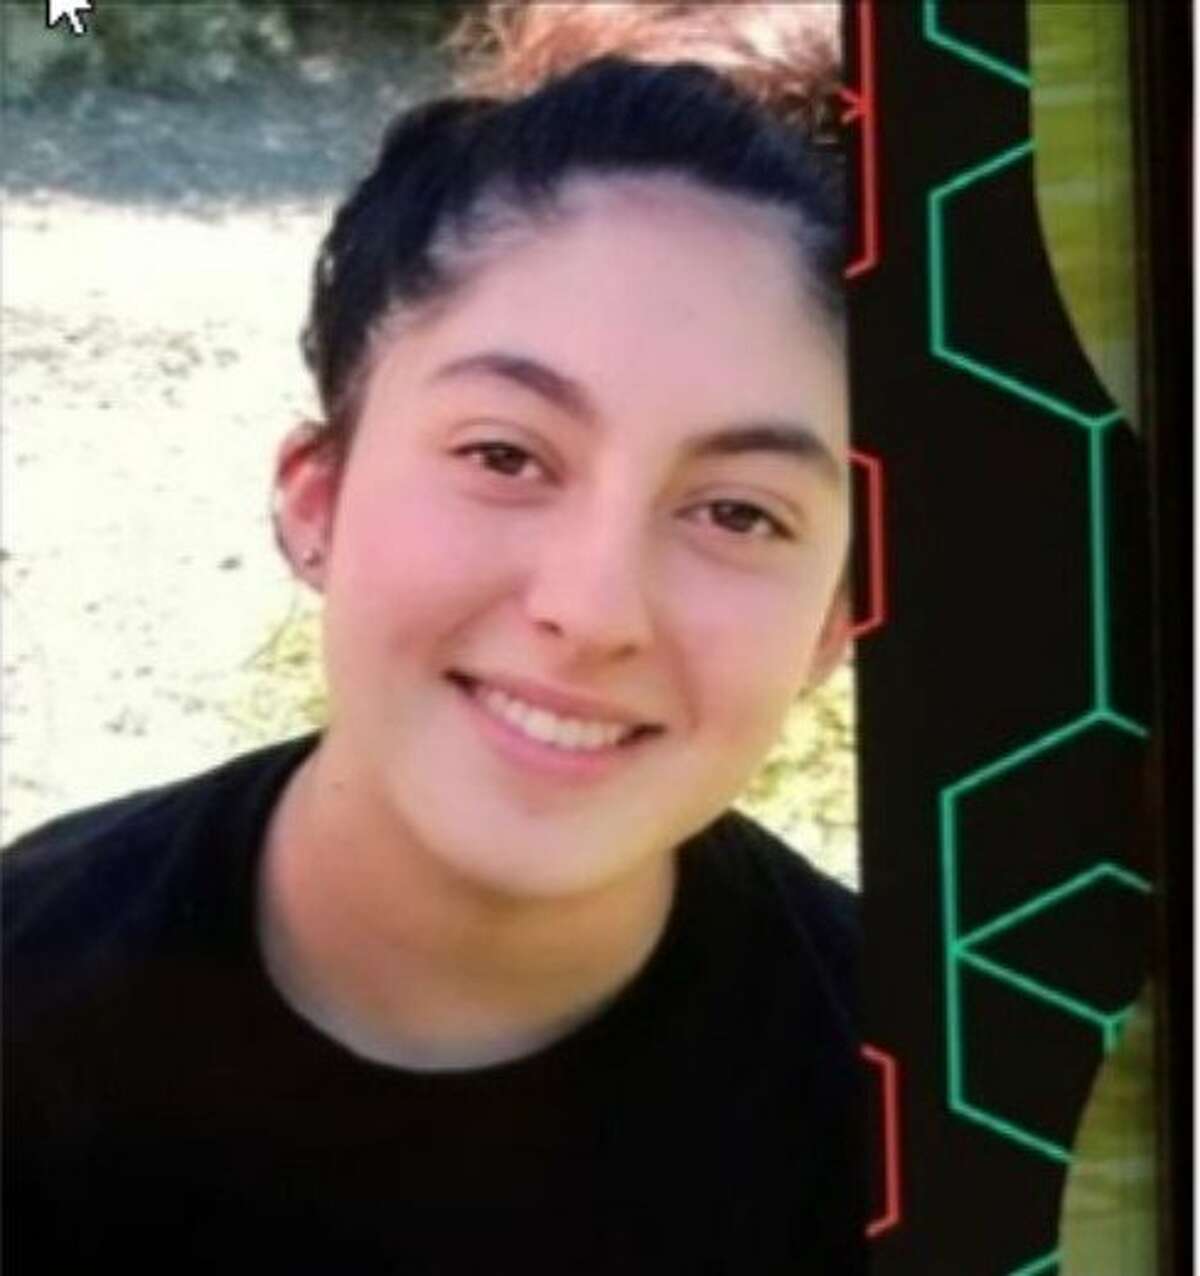 Veronica Elizabeth Prado was last seen around 10 p.m. Thursday, when she was at home in her room Rohnert Park. Police believe she may have left with a secret boyfriend.